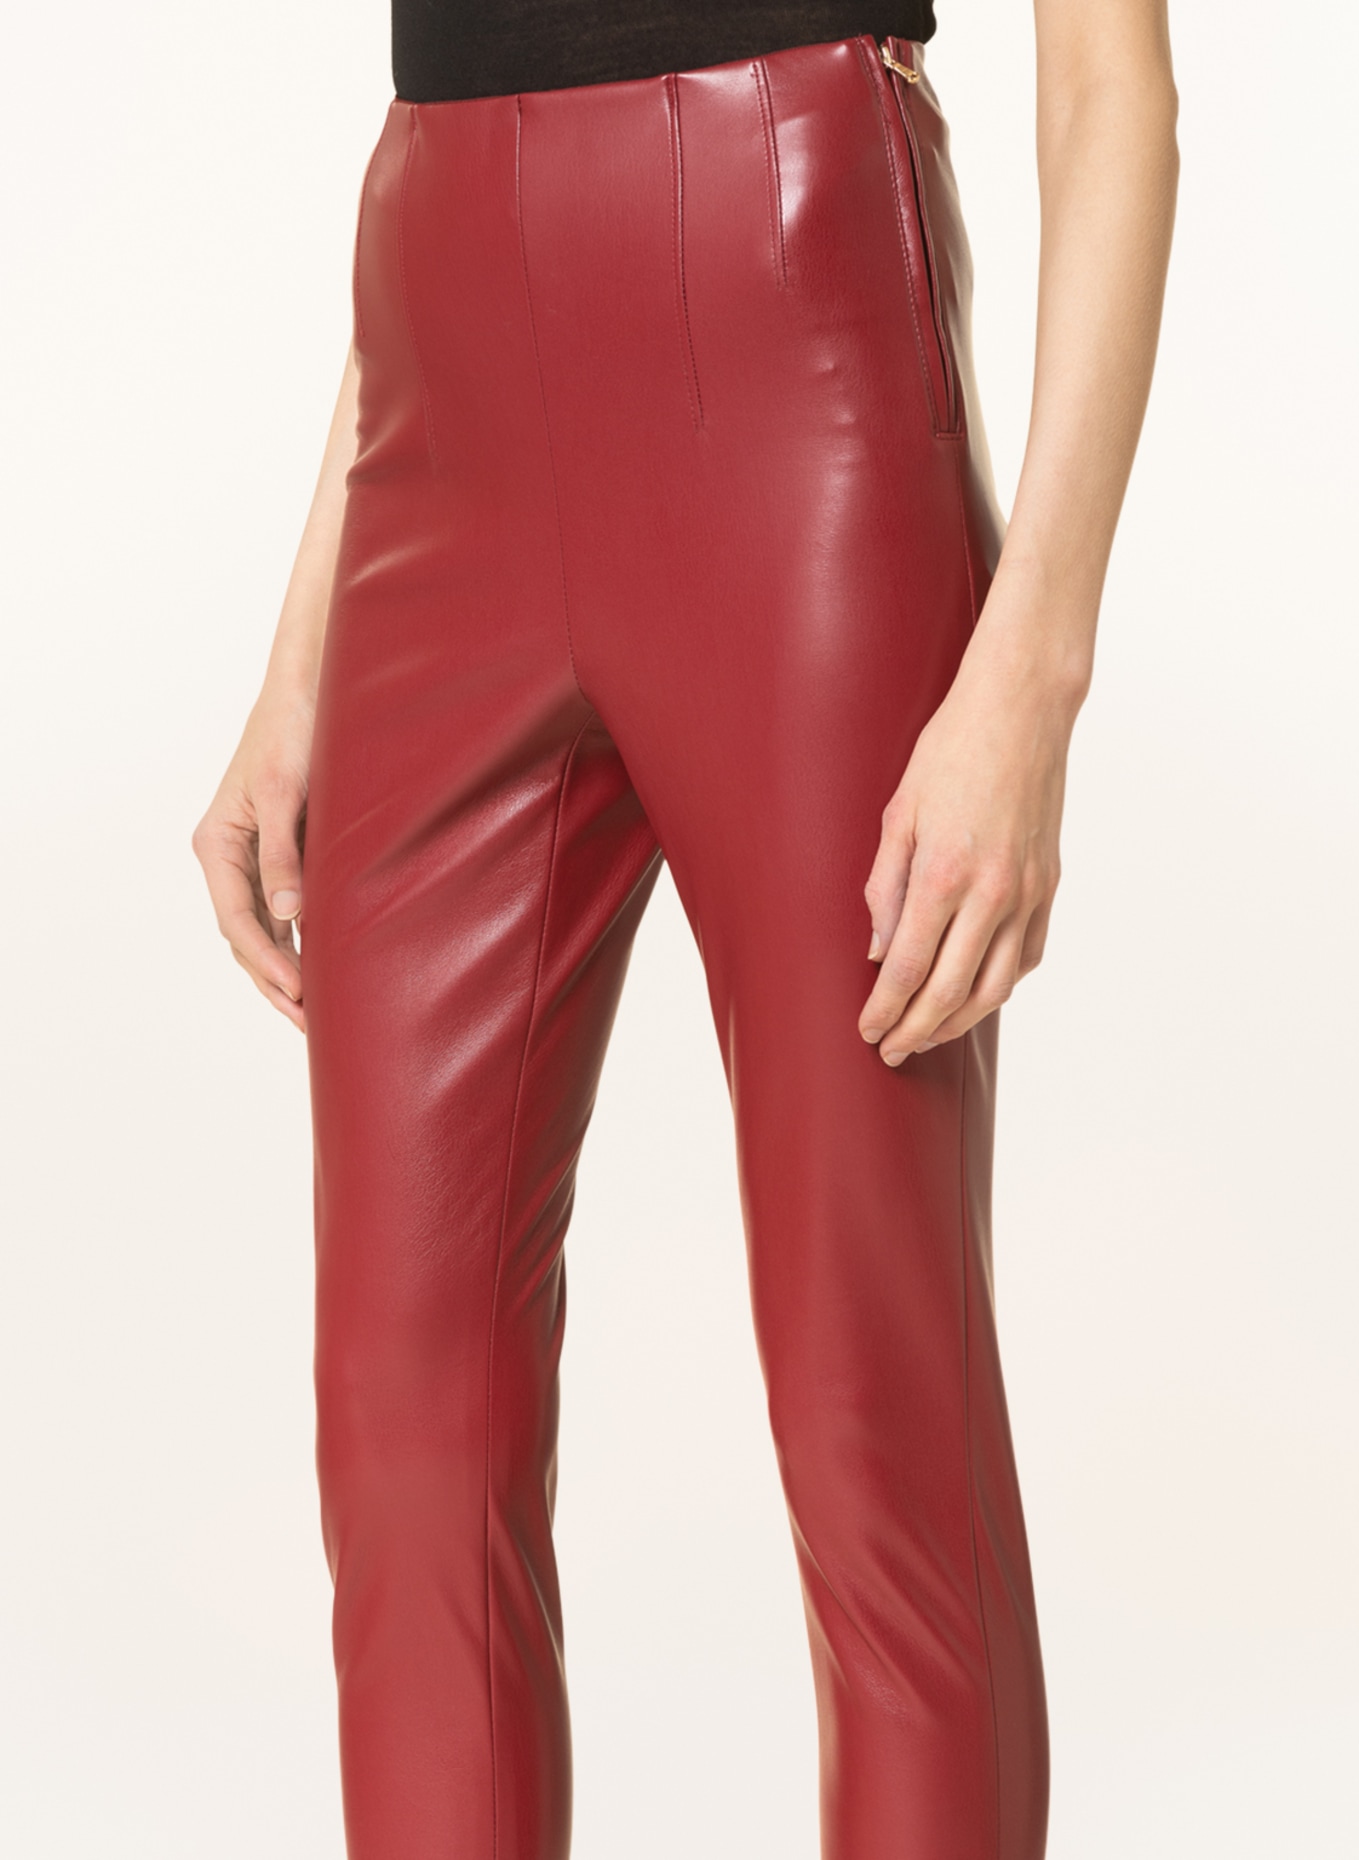 Tammy Girl Y2K low rise faux leather trousers with hip jewel embellishment  in deep red  ASOS